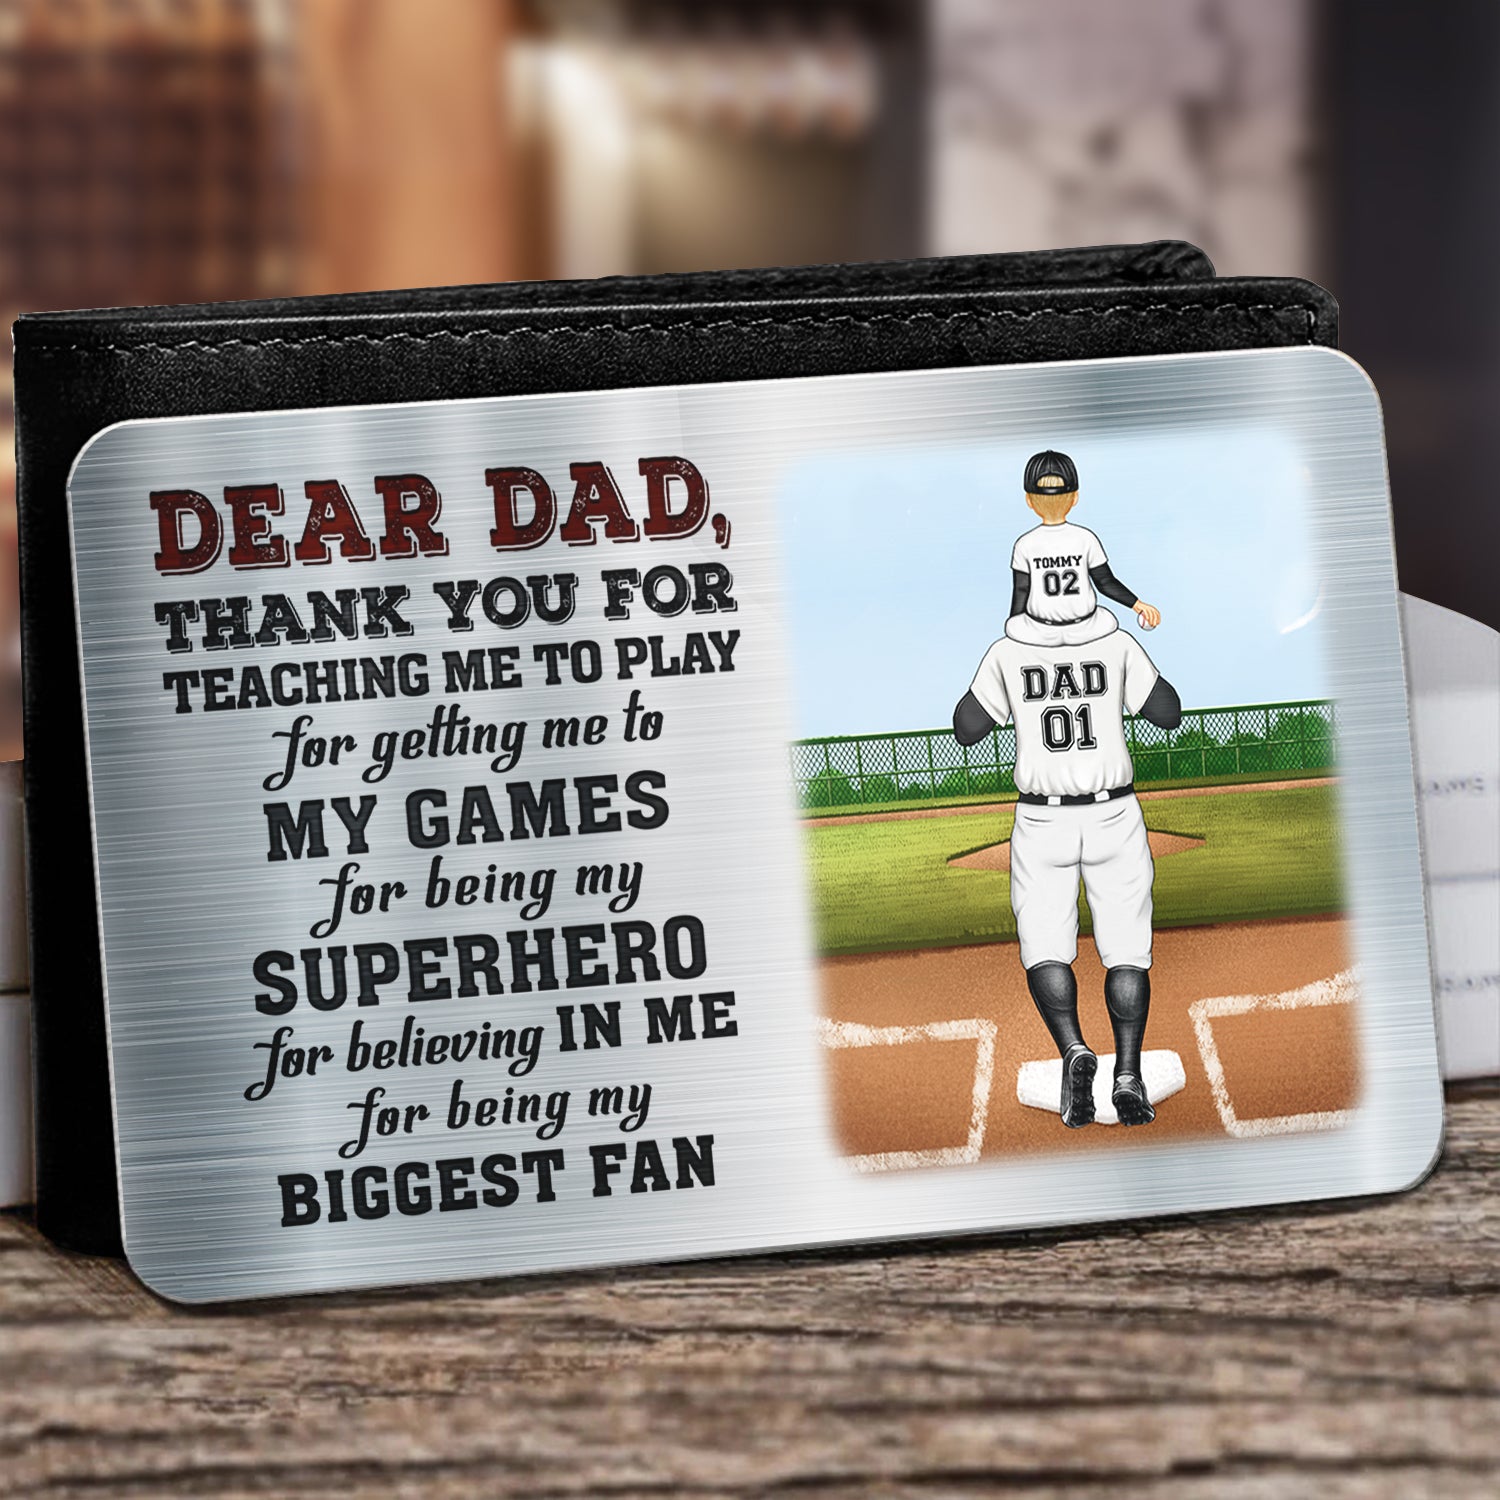 Dear Dad Thank You For Teaching Me - Birthday, Loving Gift For Baseball, Softball Father - Personalized Aluminum Wallet Card